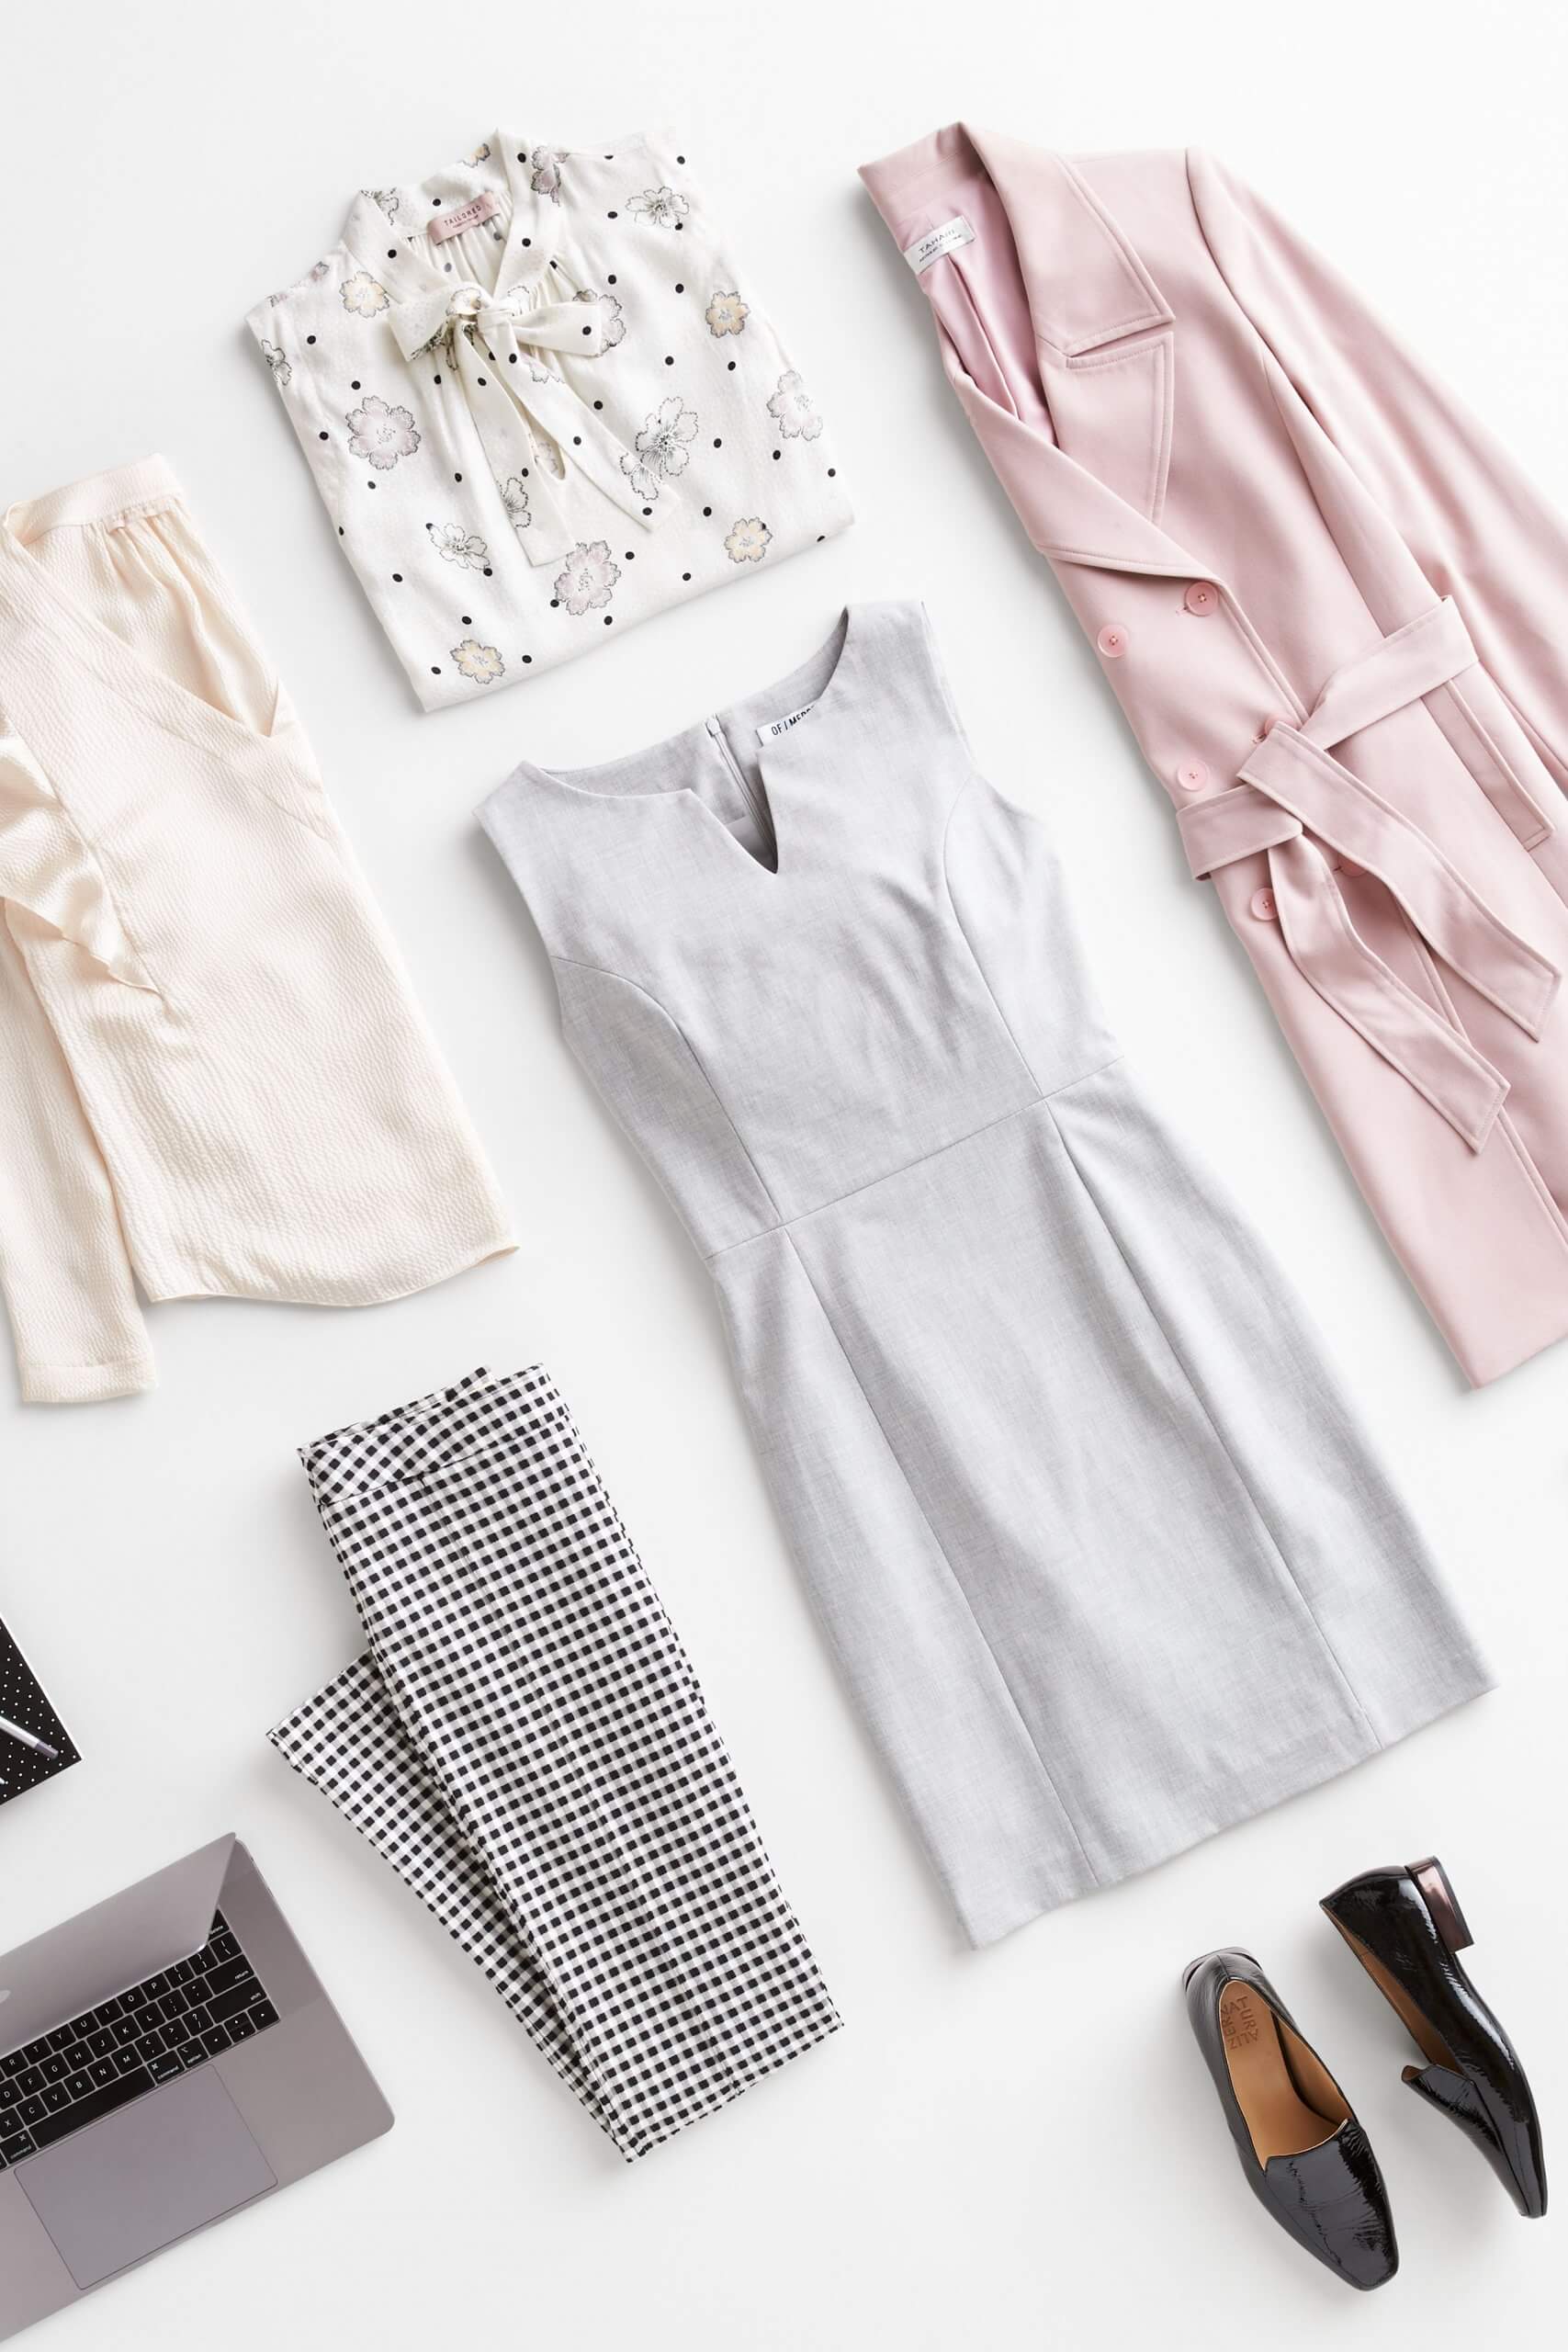 Stitch Fix Women’s outfit laydown featuring pink trench jacket, white patterned tie-neck blouse, cream blouse, black and white checkered pants, grey sheath dress and black loafers.